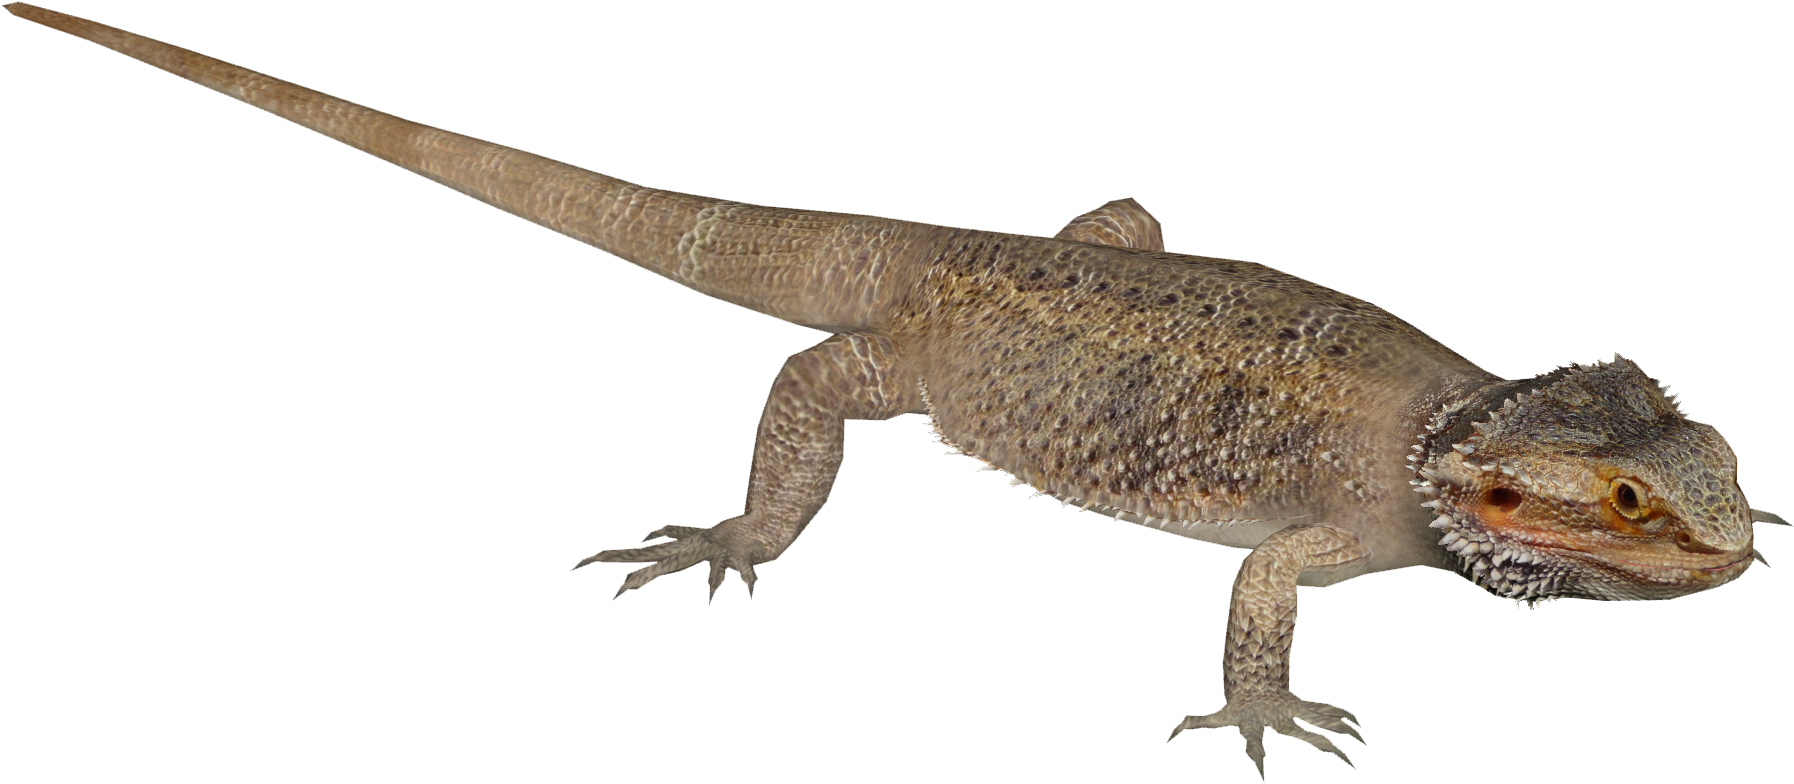 Agamas PNG HD Quality